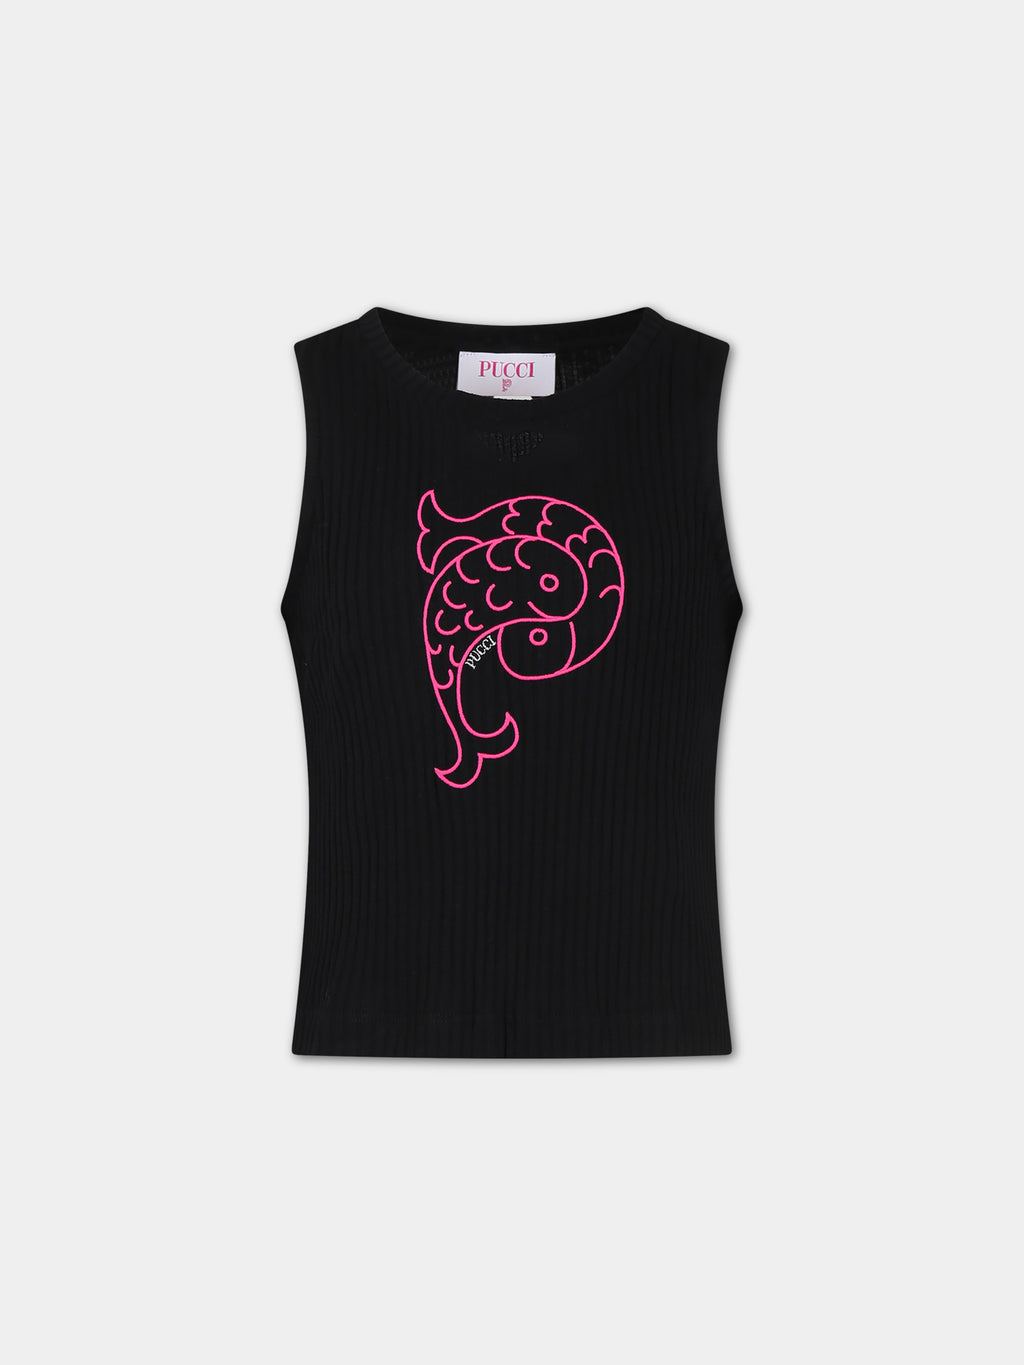 Black tank top for girl with logo